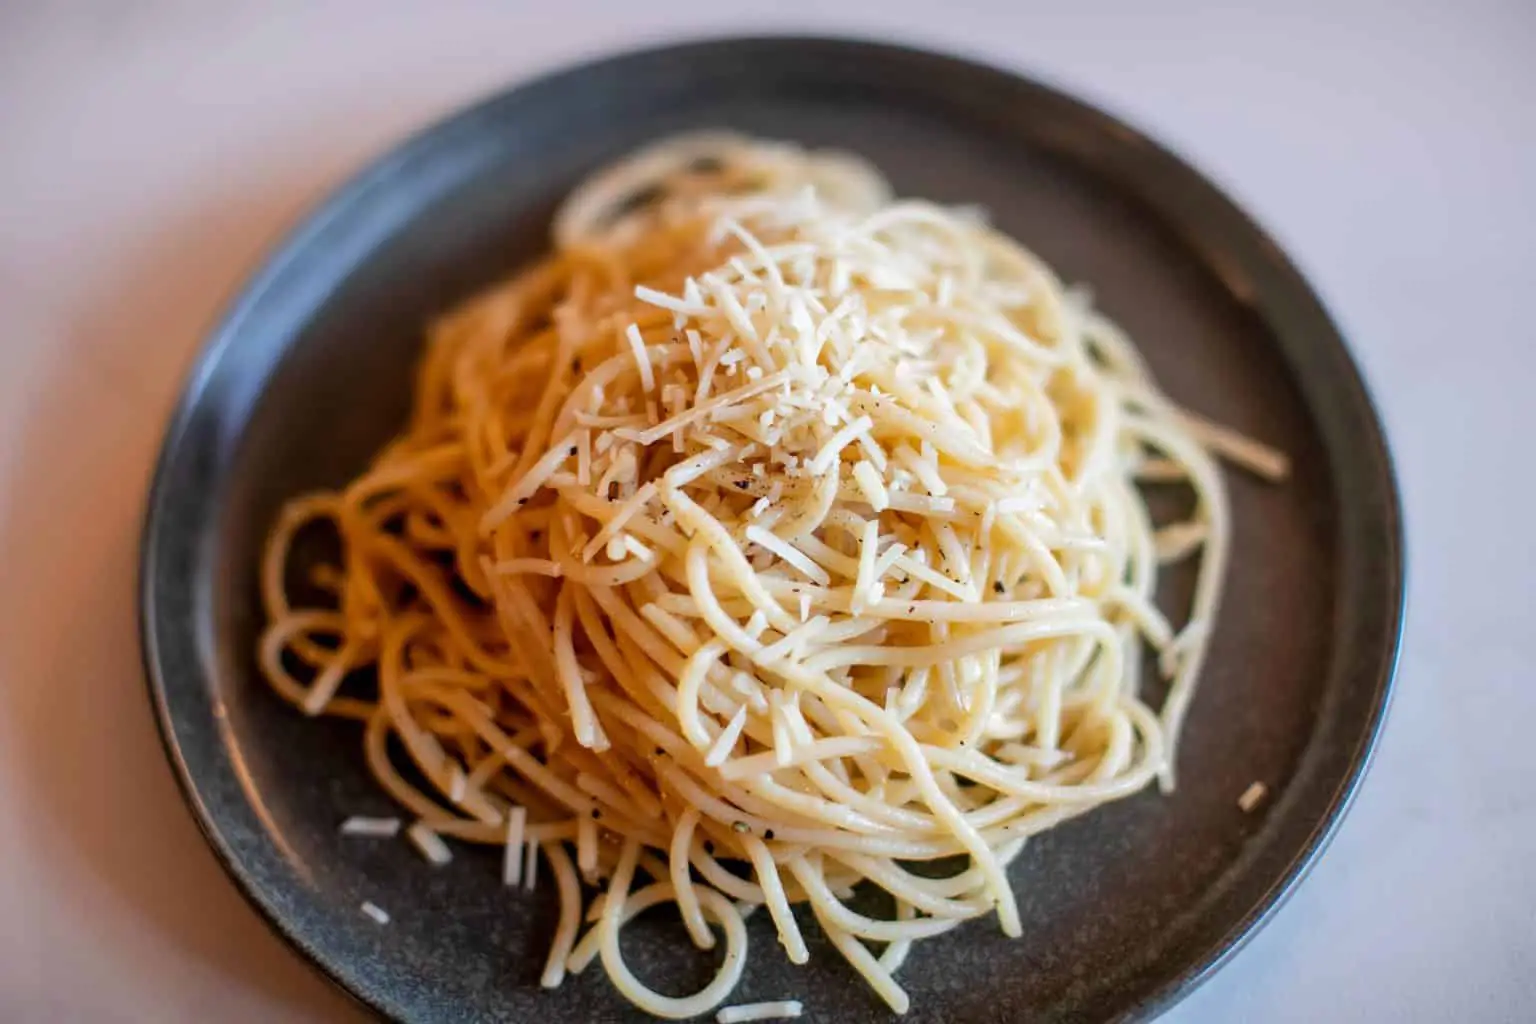 Prepared Parmesan buttered noodles recipe on a plate